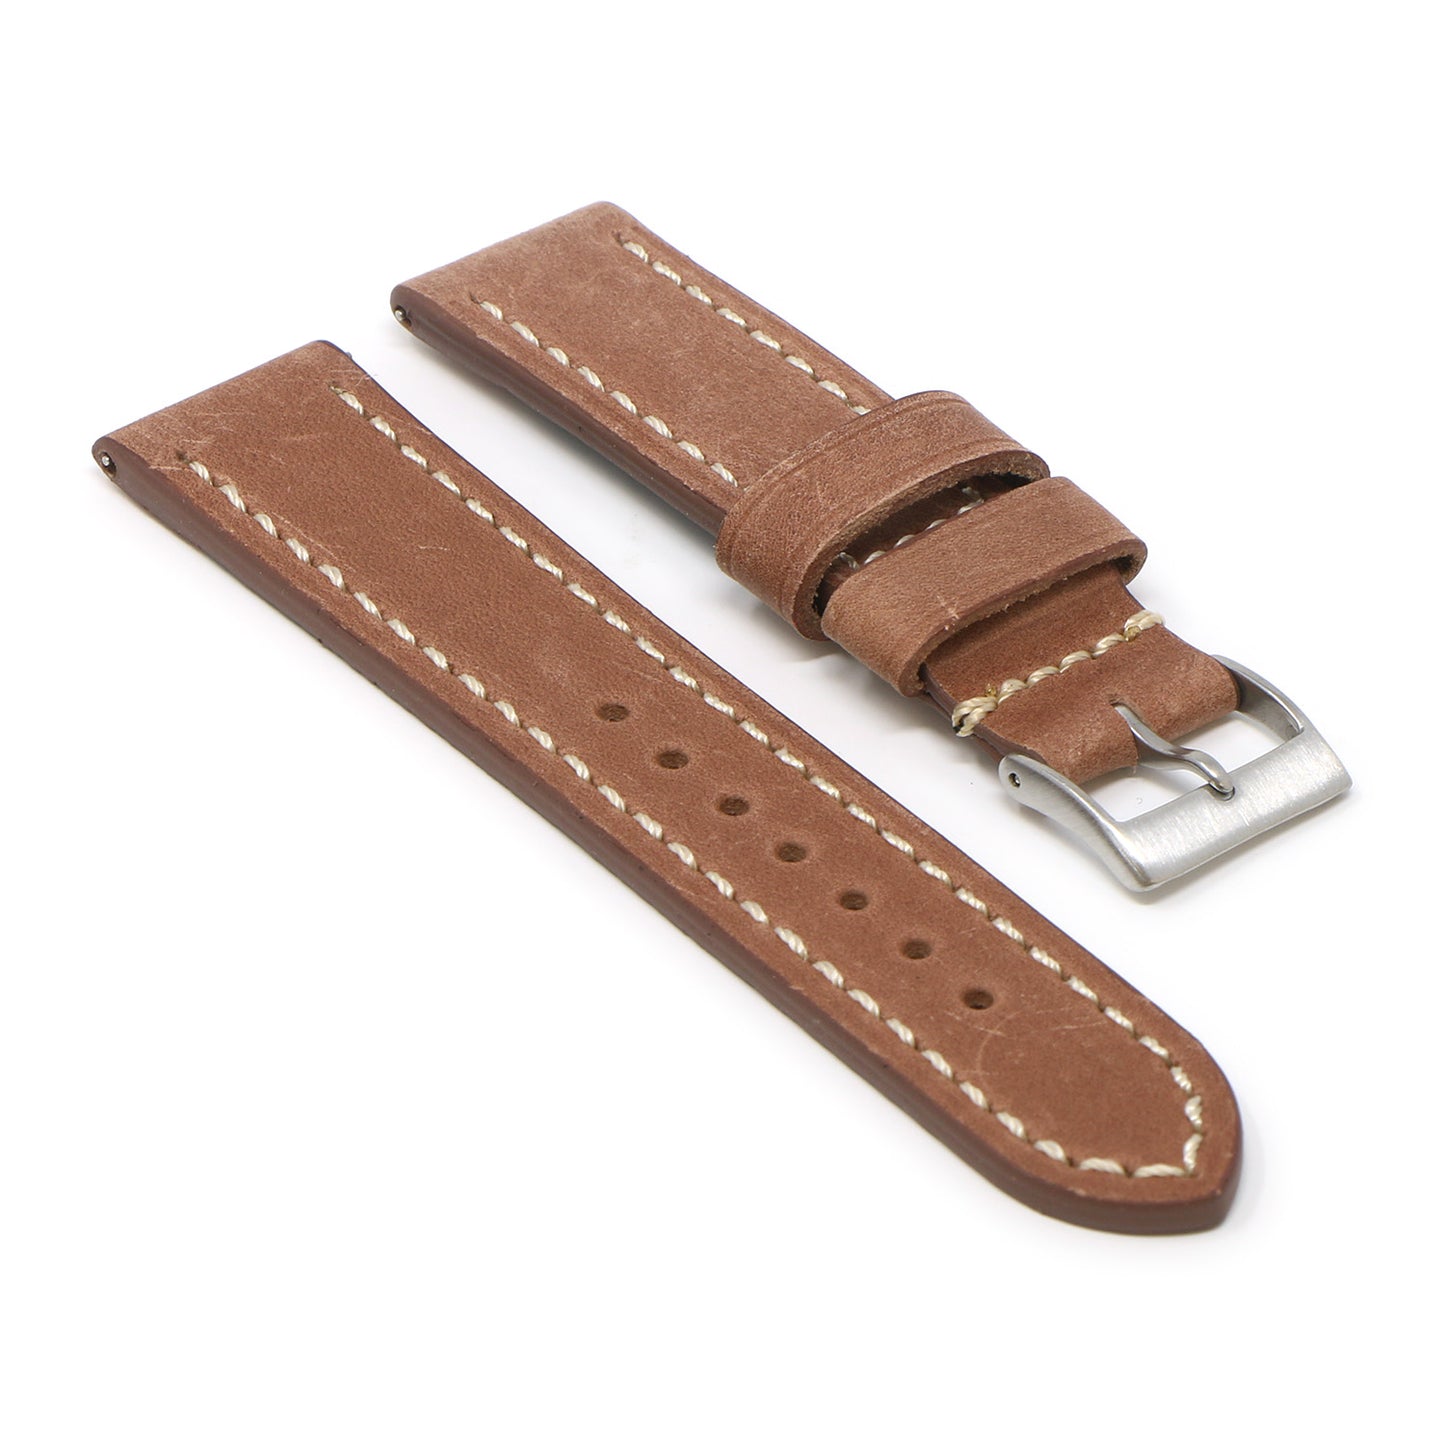 Vintage Leather Strap for Samsung Galaxy Watch 3